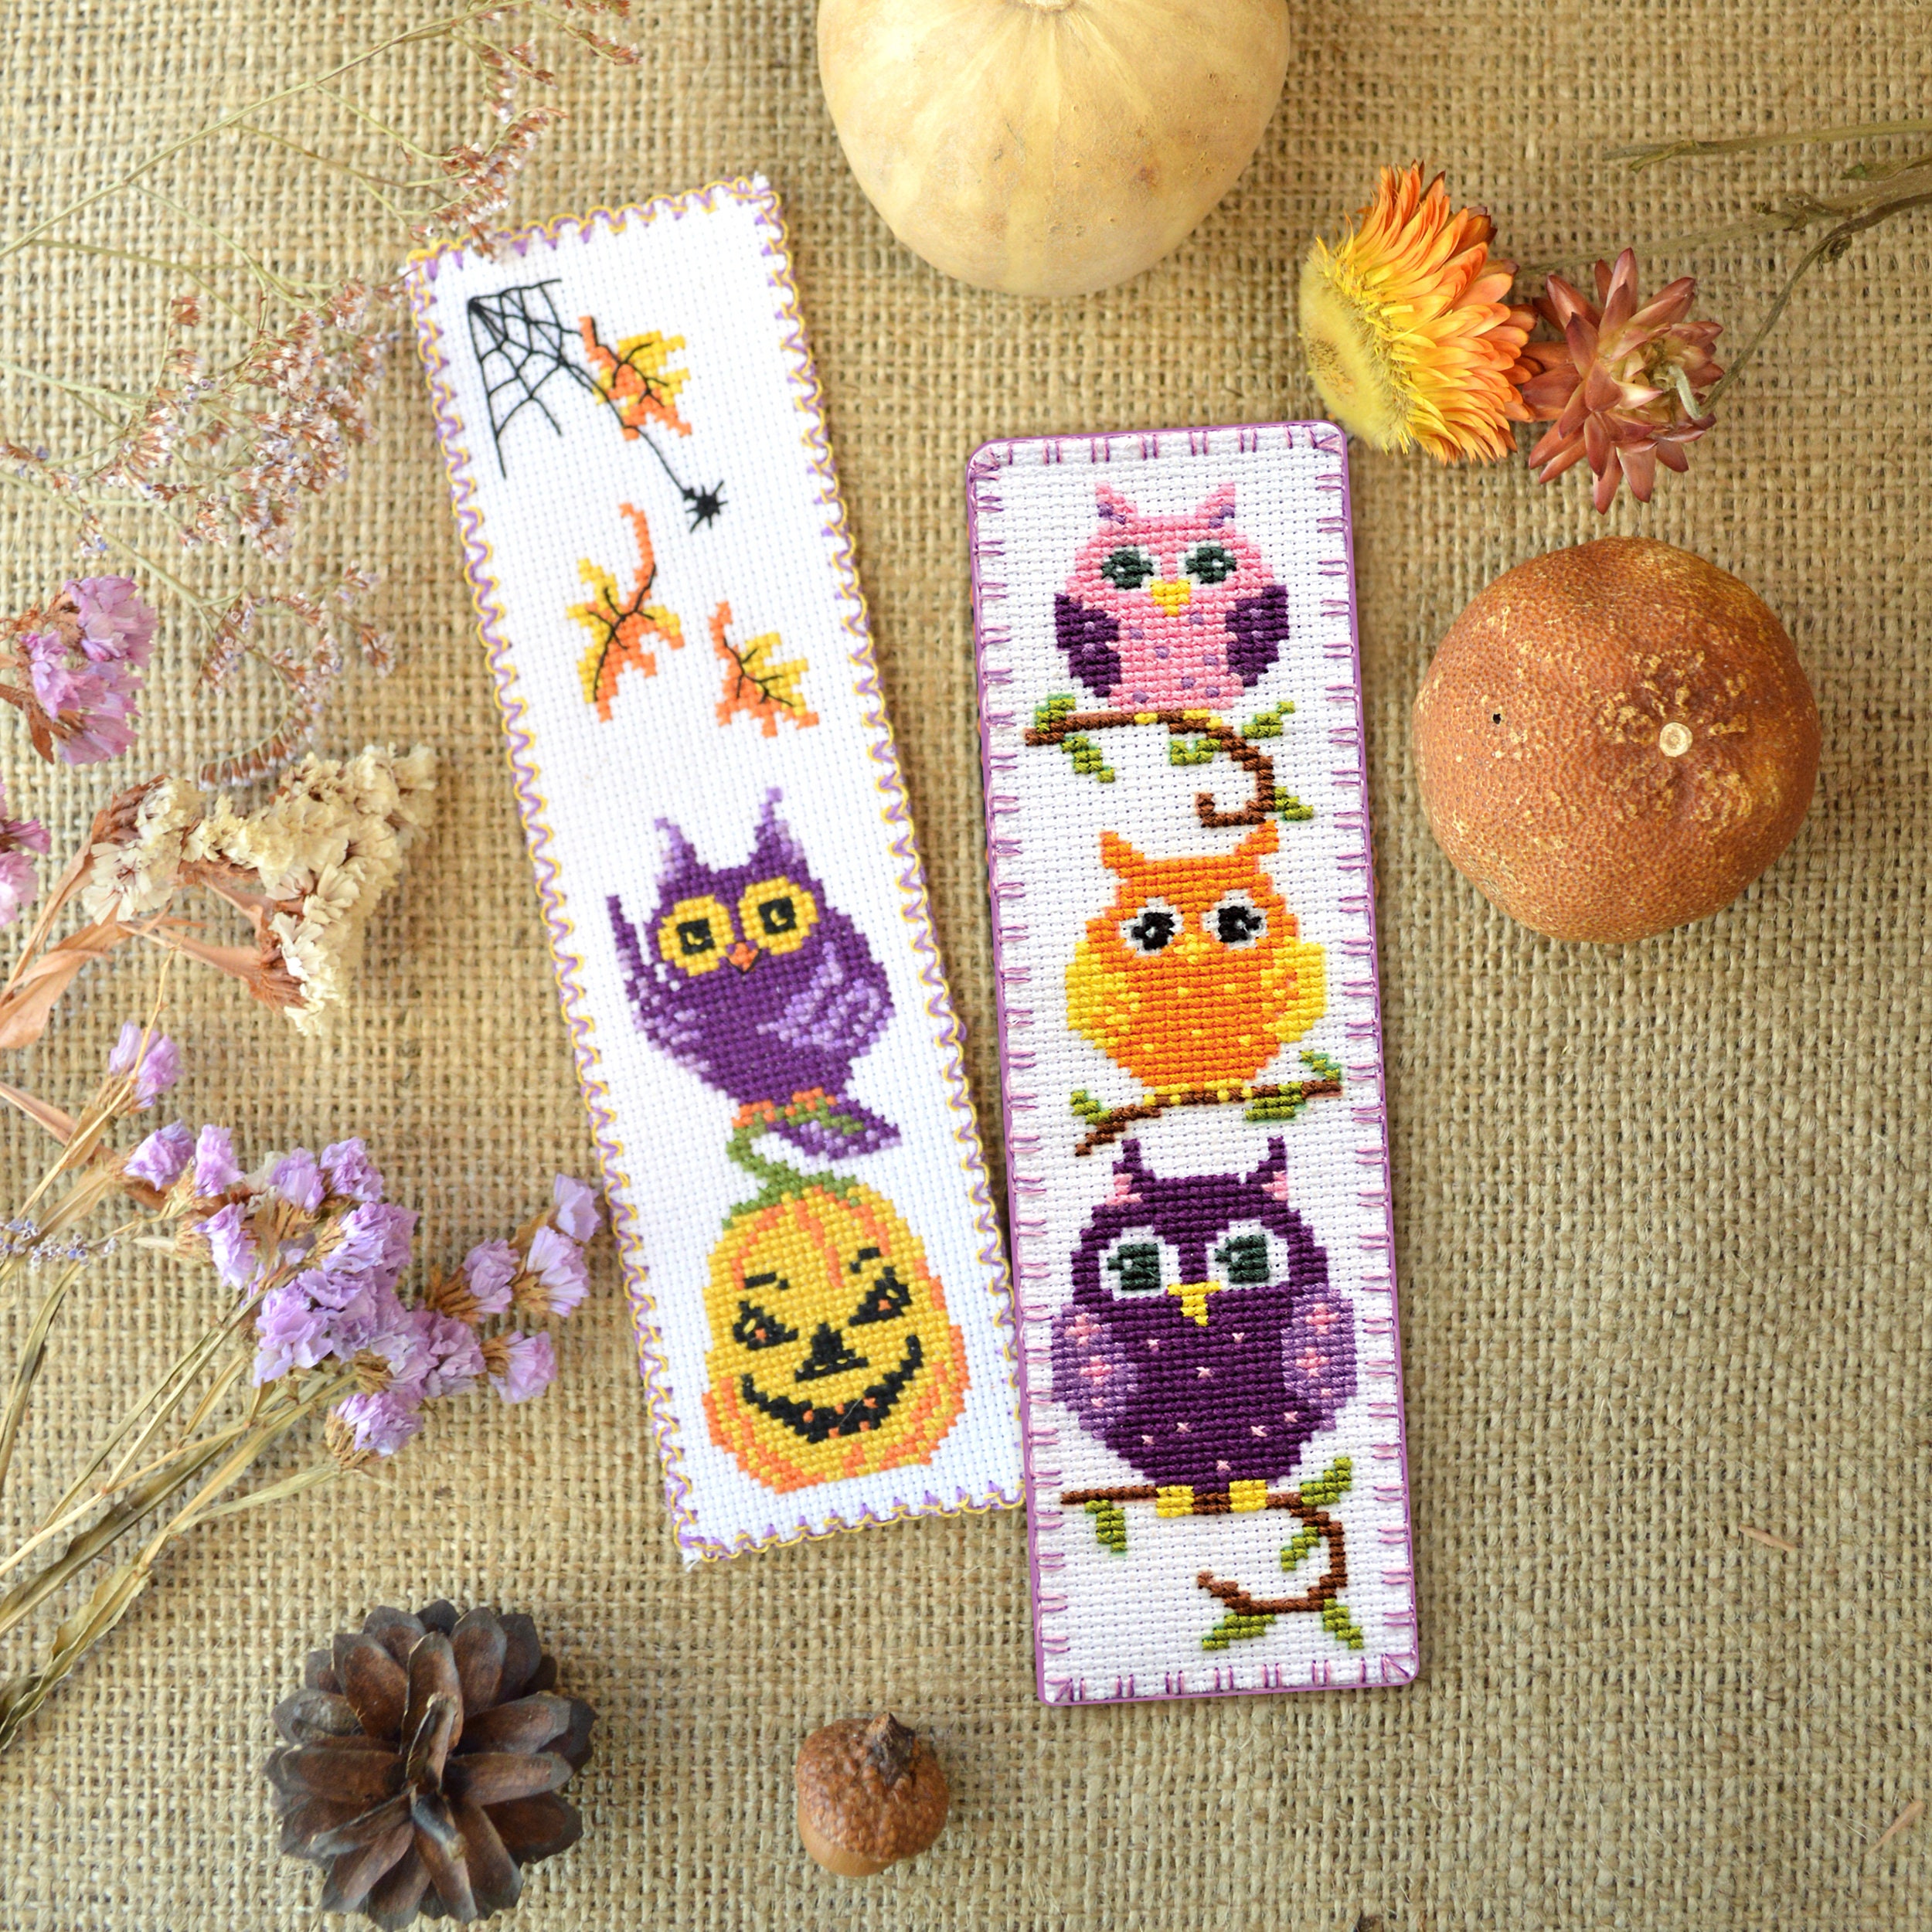 Check and Plaid Bookmarks - Free Cross Stitch Patterns - Crafting Cheerfully